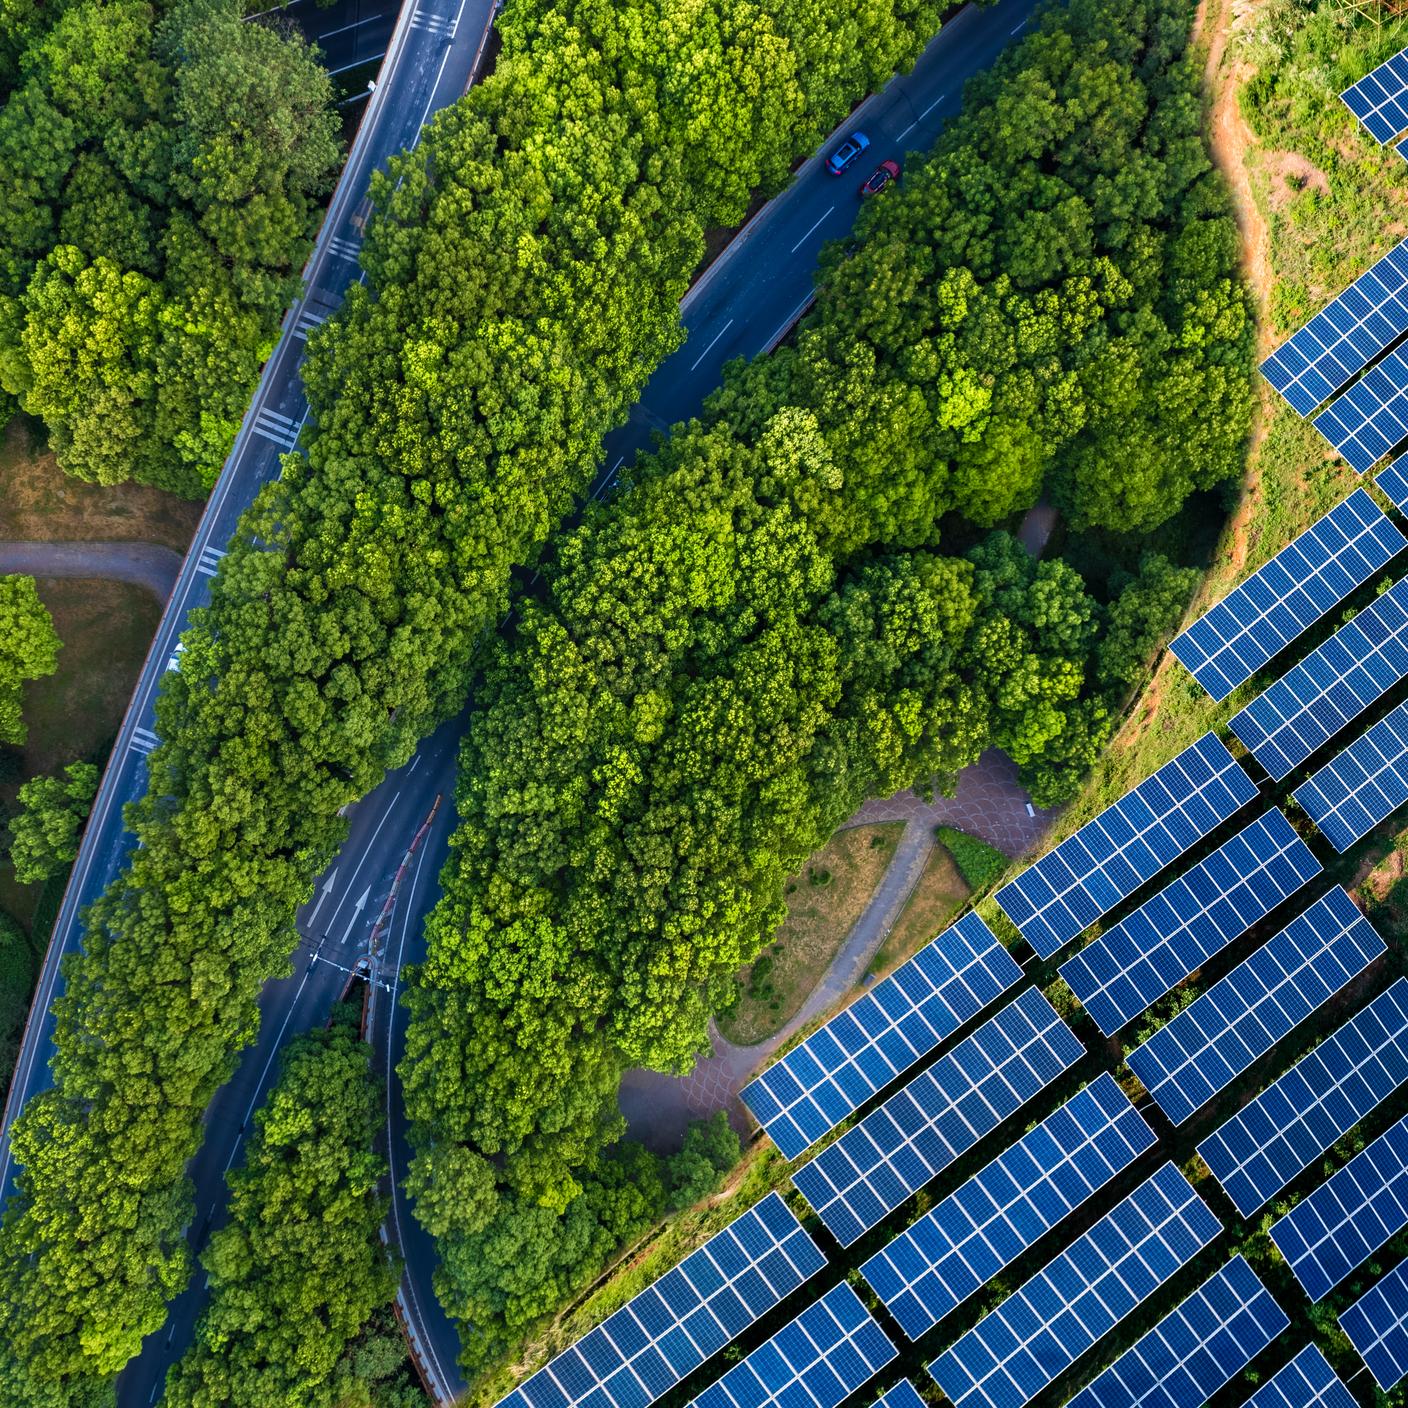 High angle view of solar panels and agricultural landscape